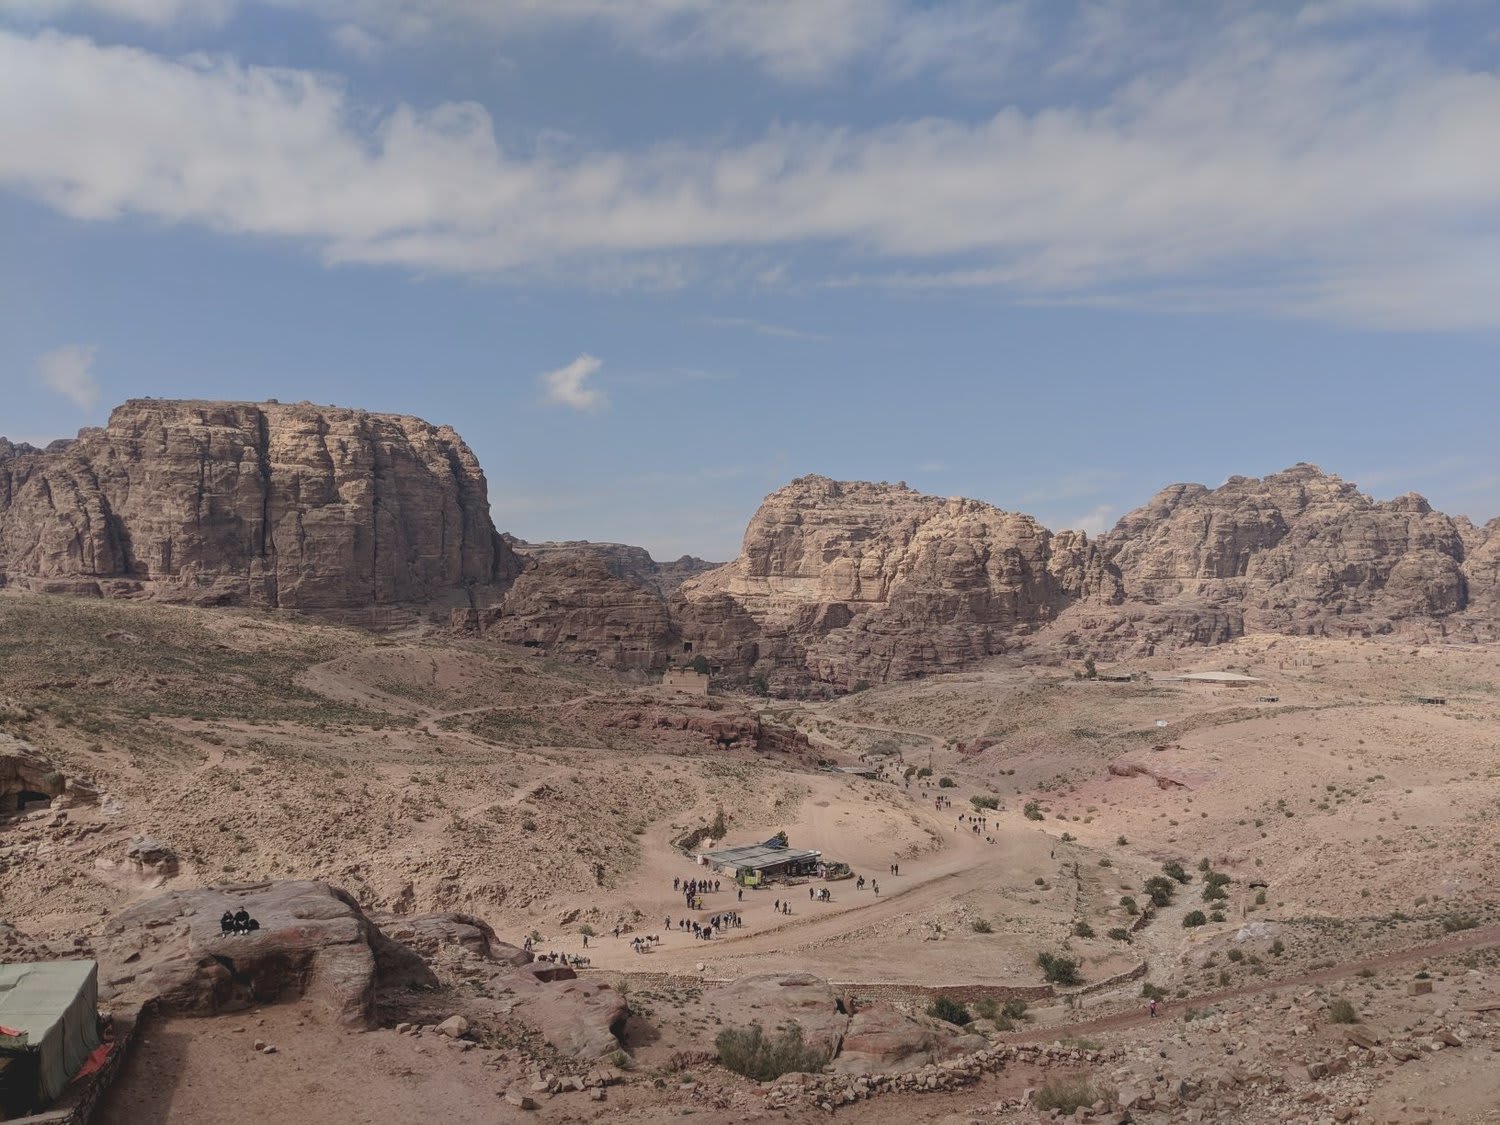 Here's how to visit Petra, Jordan on a budget